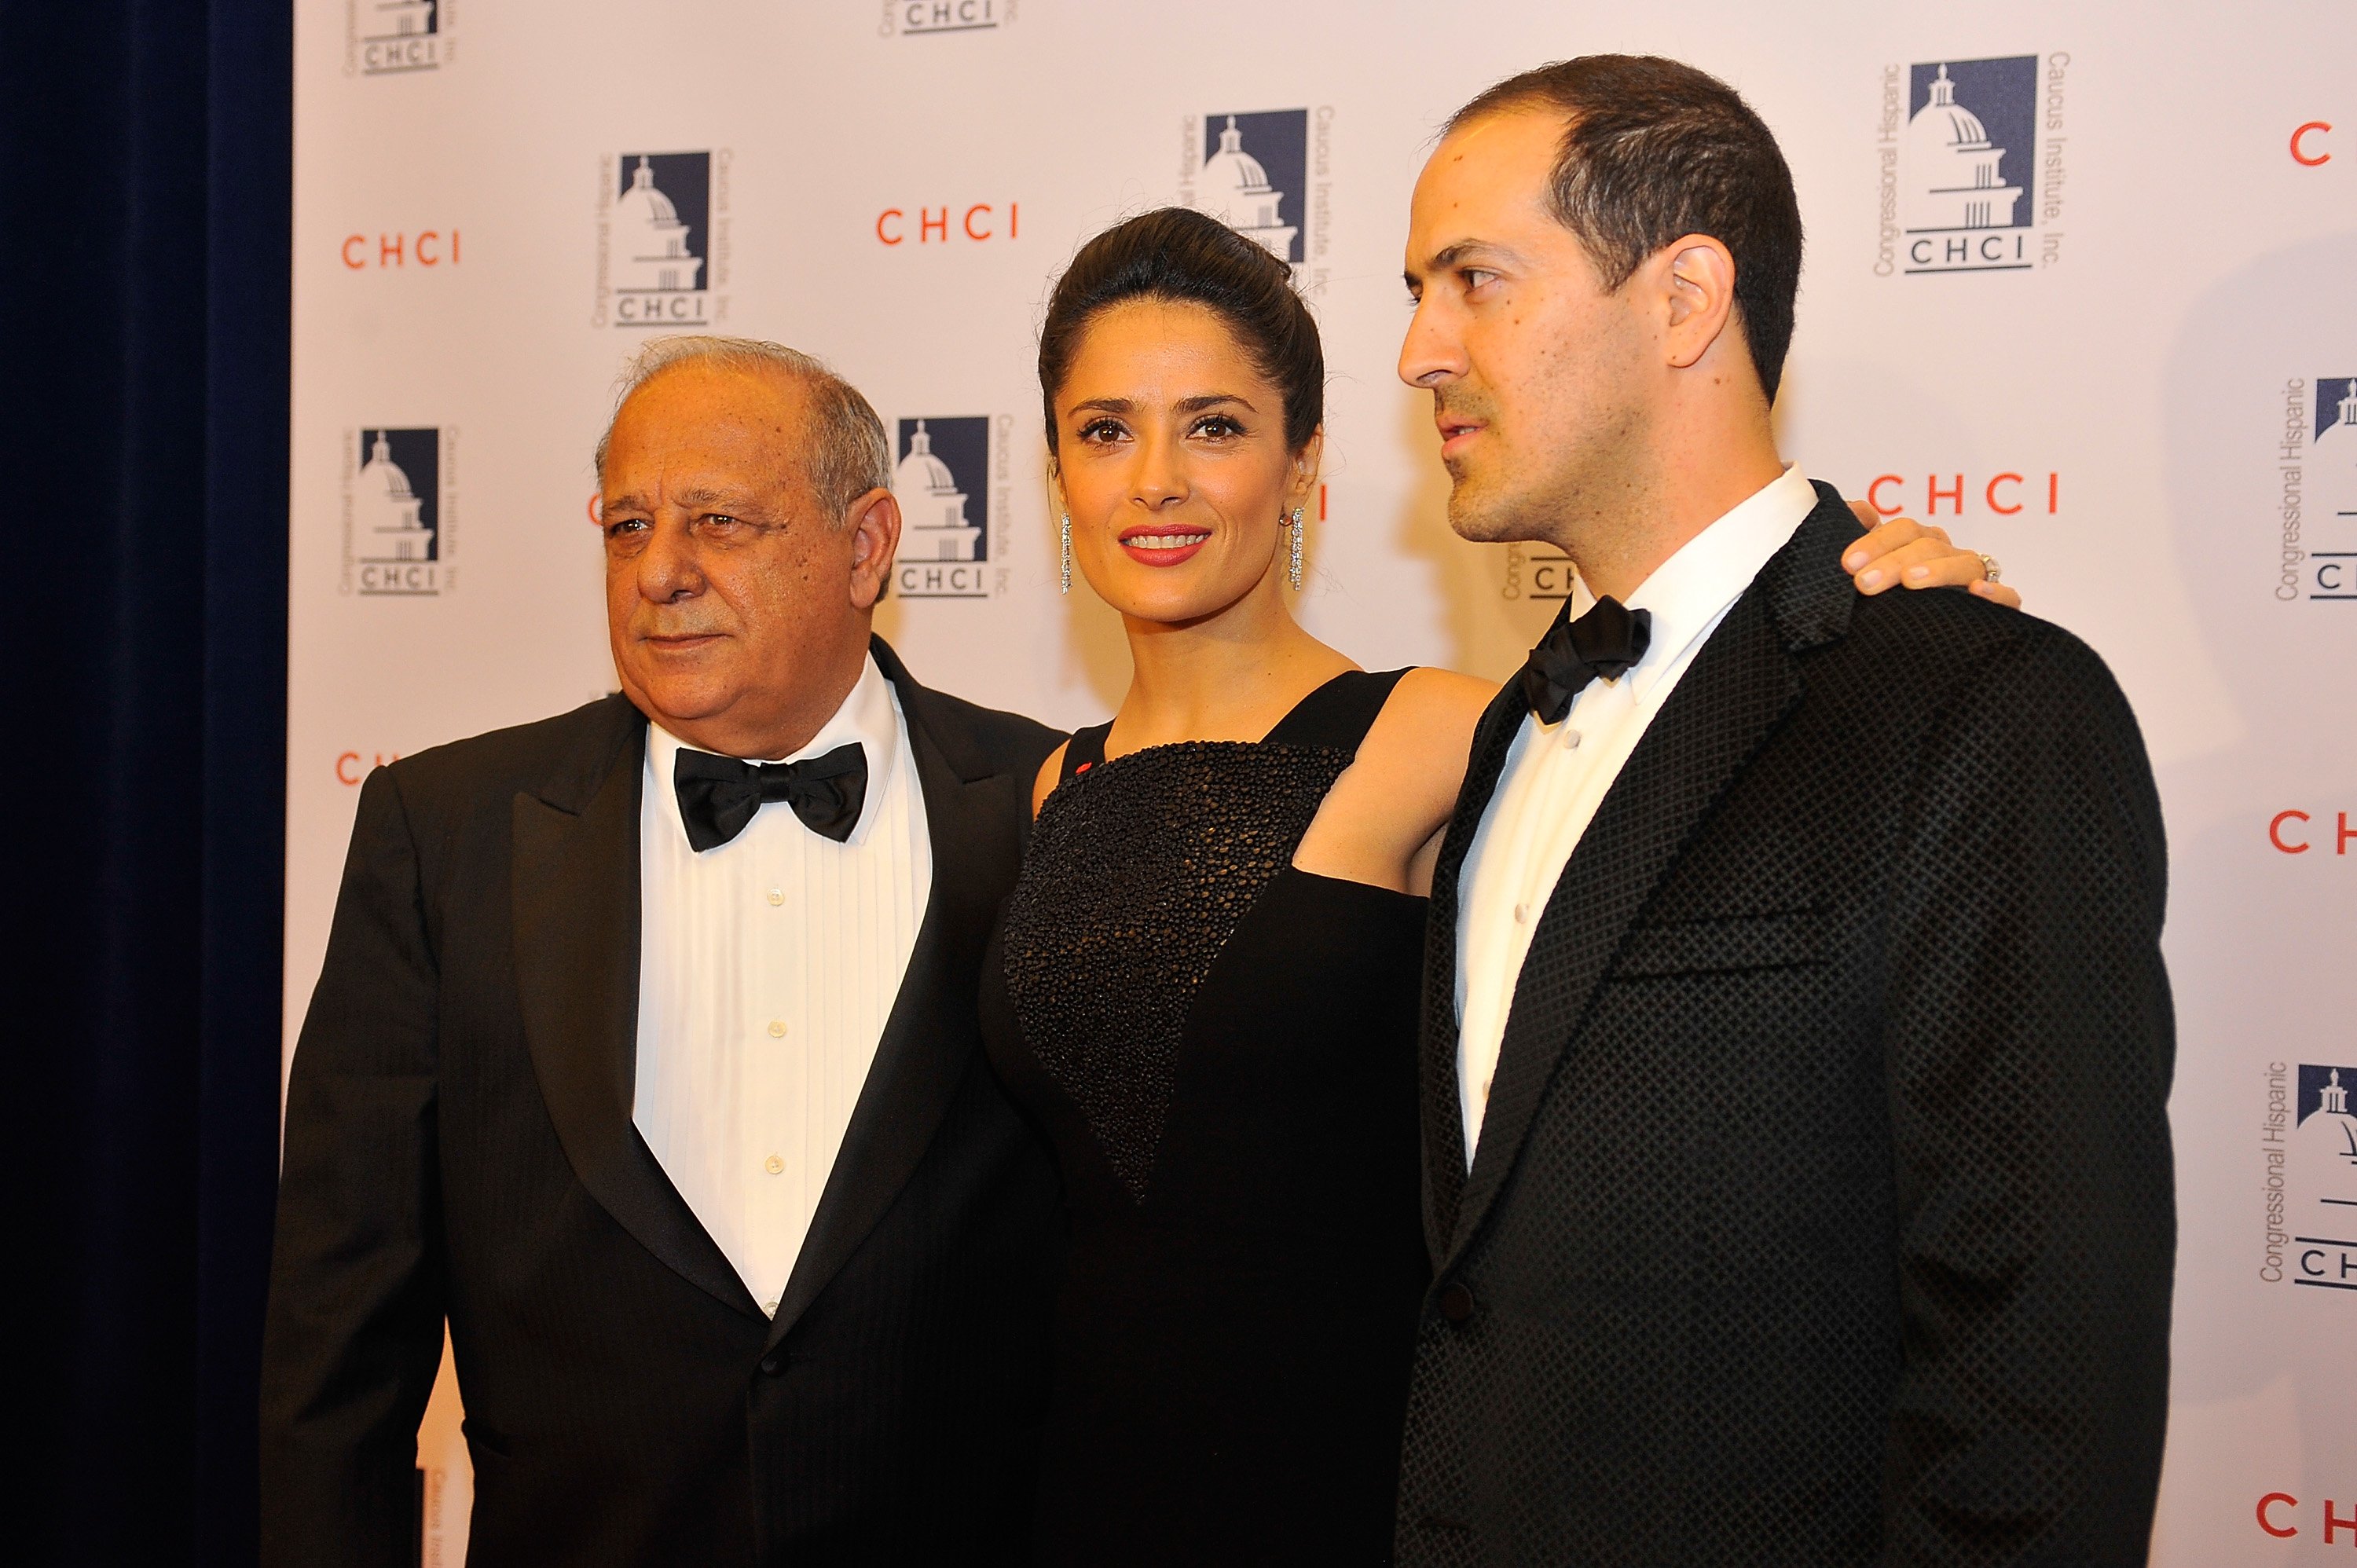 Salma Hayek with her father, Sami, and her brother, Sami Jr at the Congressional Hispanic Caucus Institute Gala in 2013. in Washington, DC. | Source: Getty Images